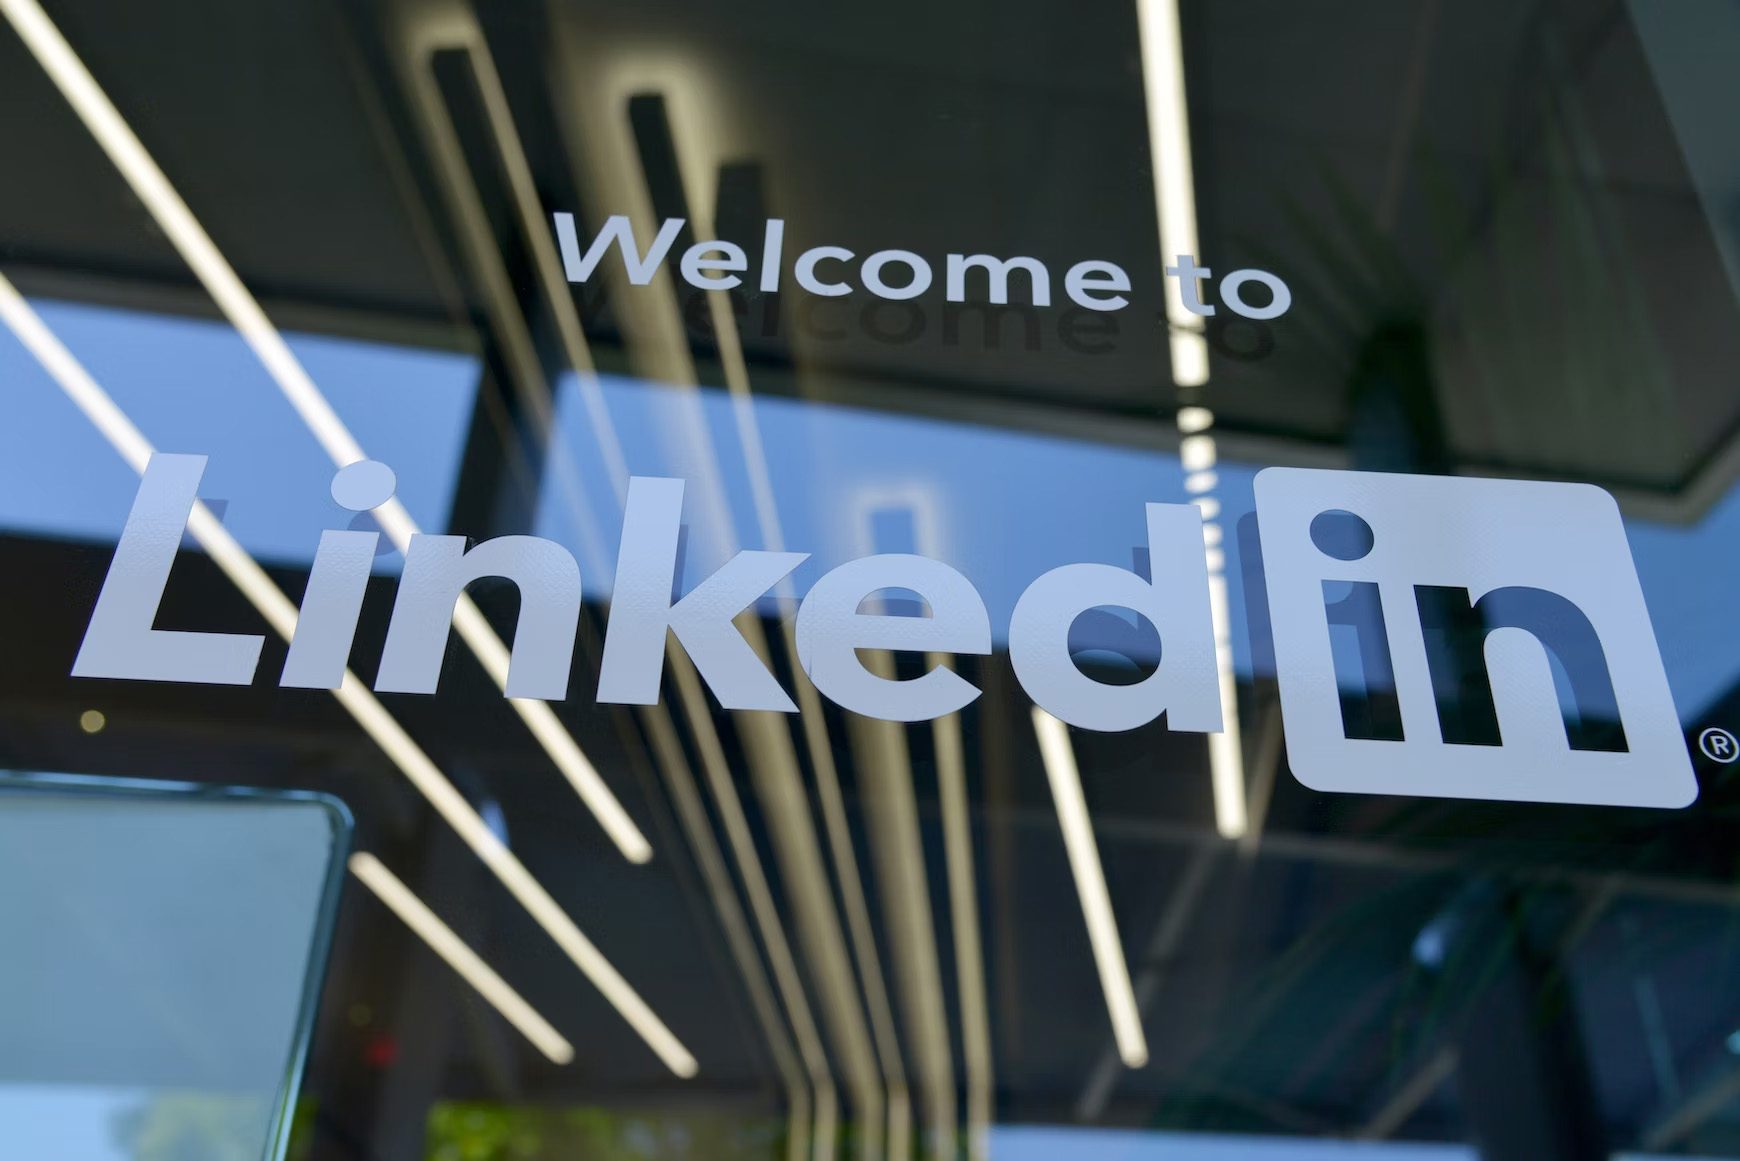 A door sign saying "Welcome to LinkedIn"